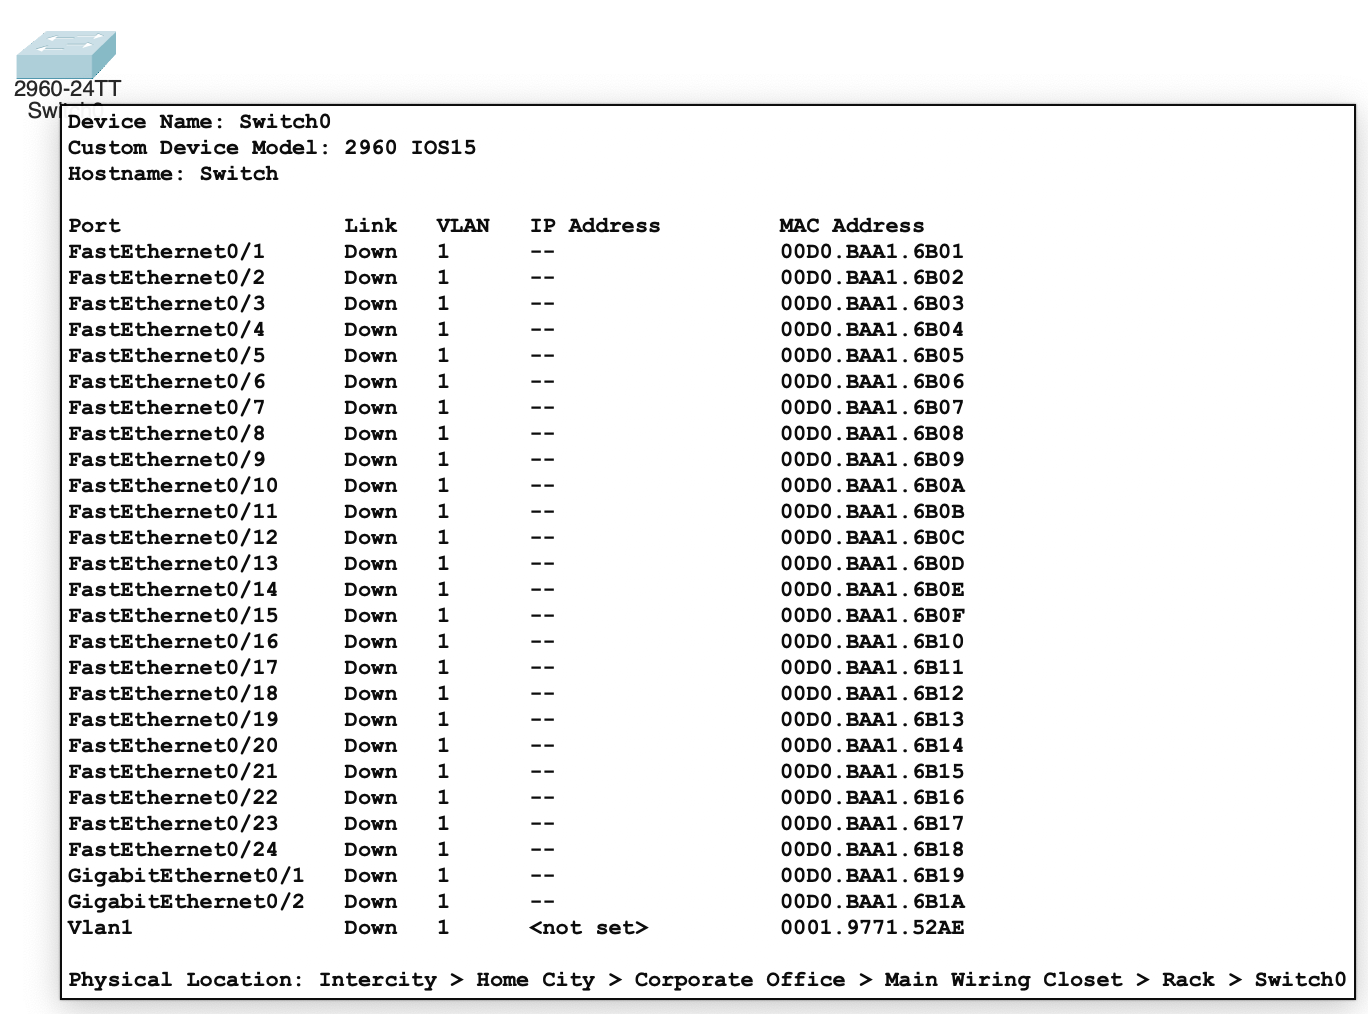 Screenshot of the Cisco Catalyst 2960 switch ports